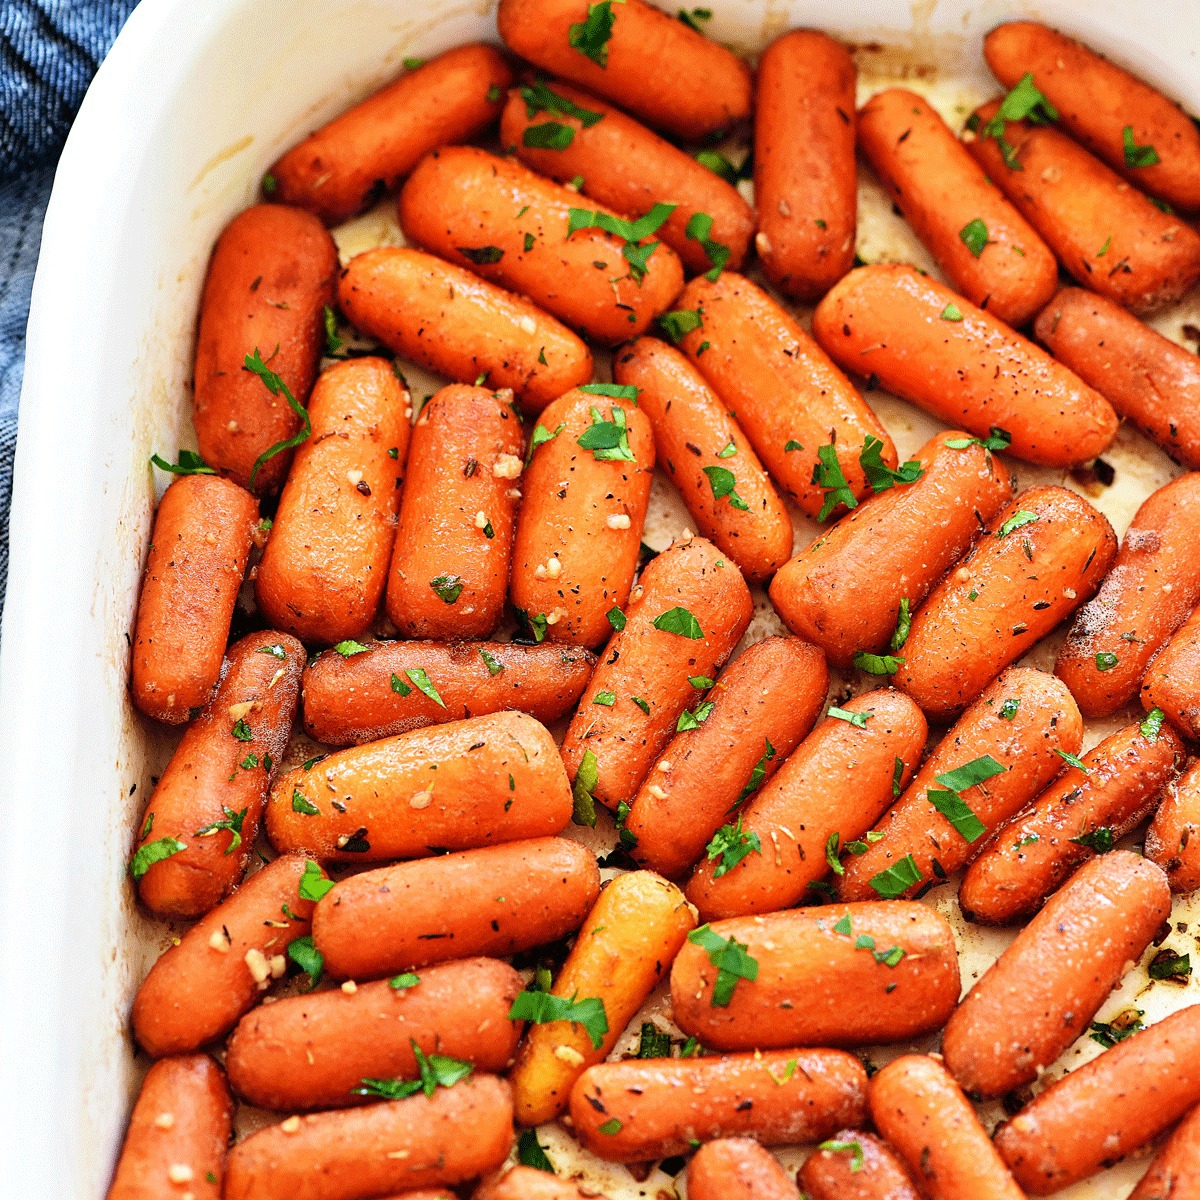 Delicious oven-baked Garlic Roasted Carrots that are loaded with flavor. Life-in-the-Lofthouse.com